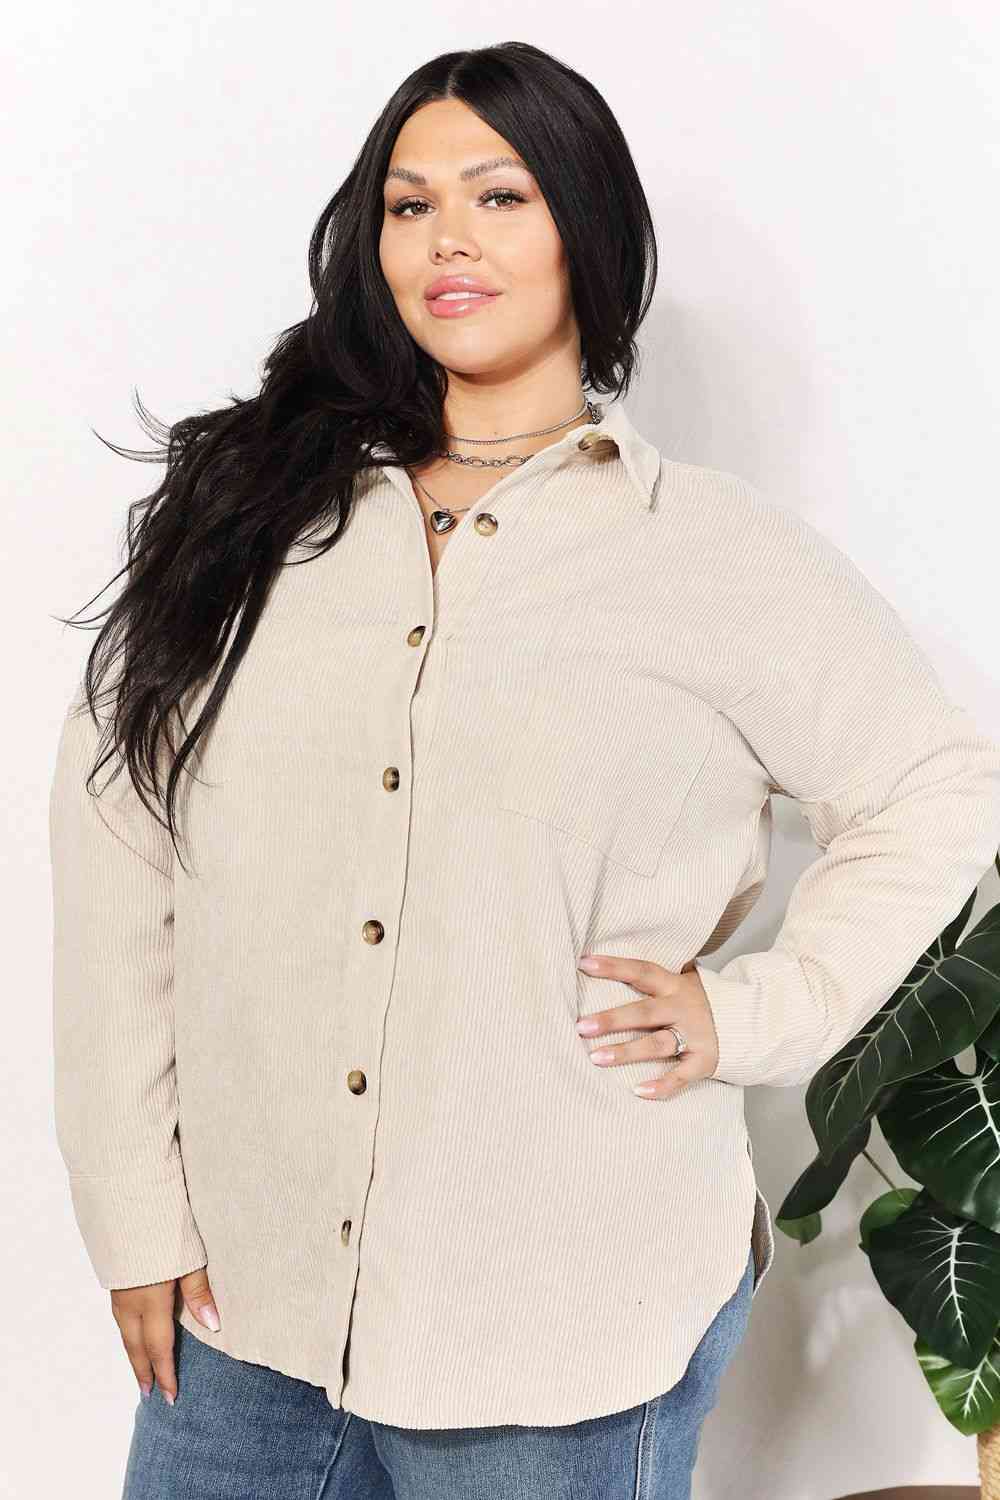 HEYSON Full Size Oversized Corduroy Button-Down Tunic Shirt with Bust Pocket Cream